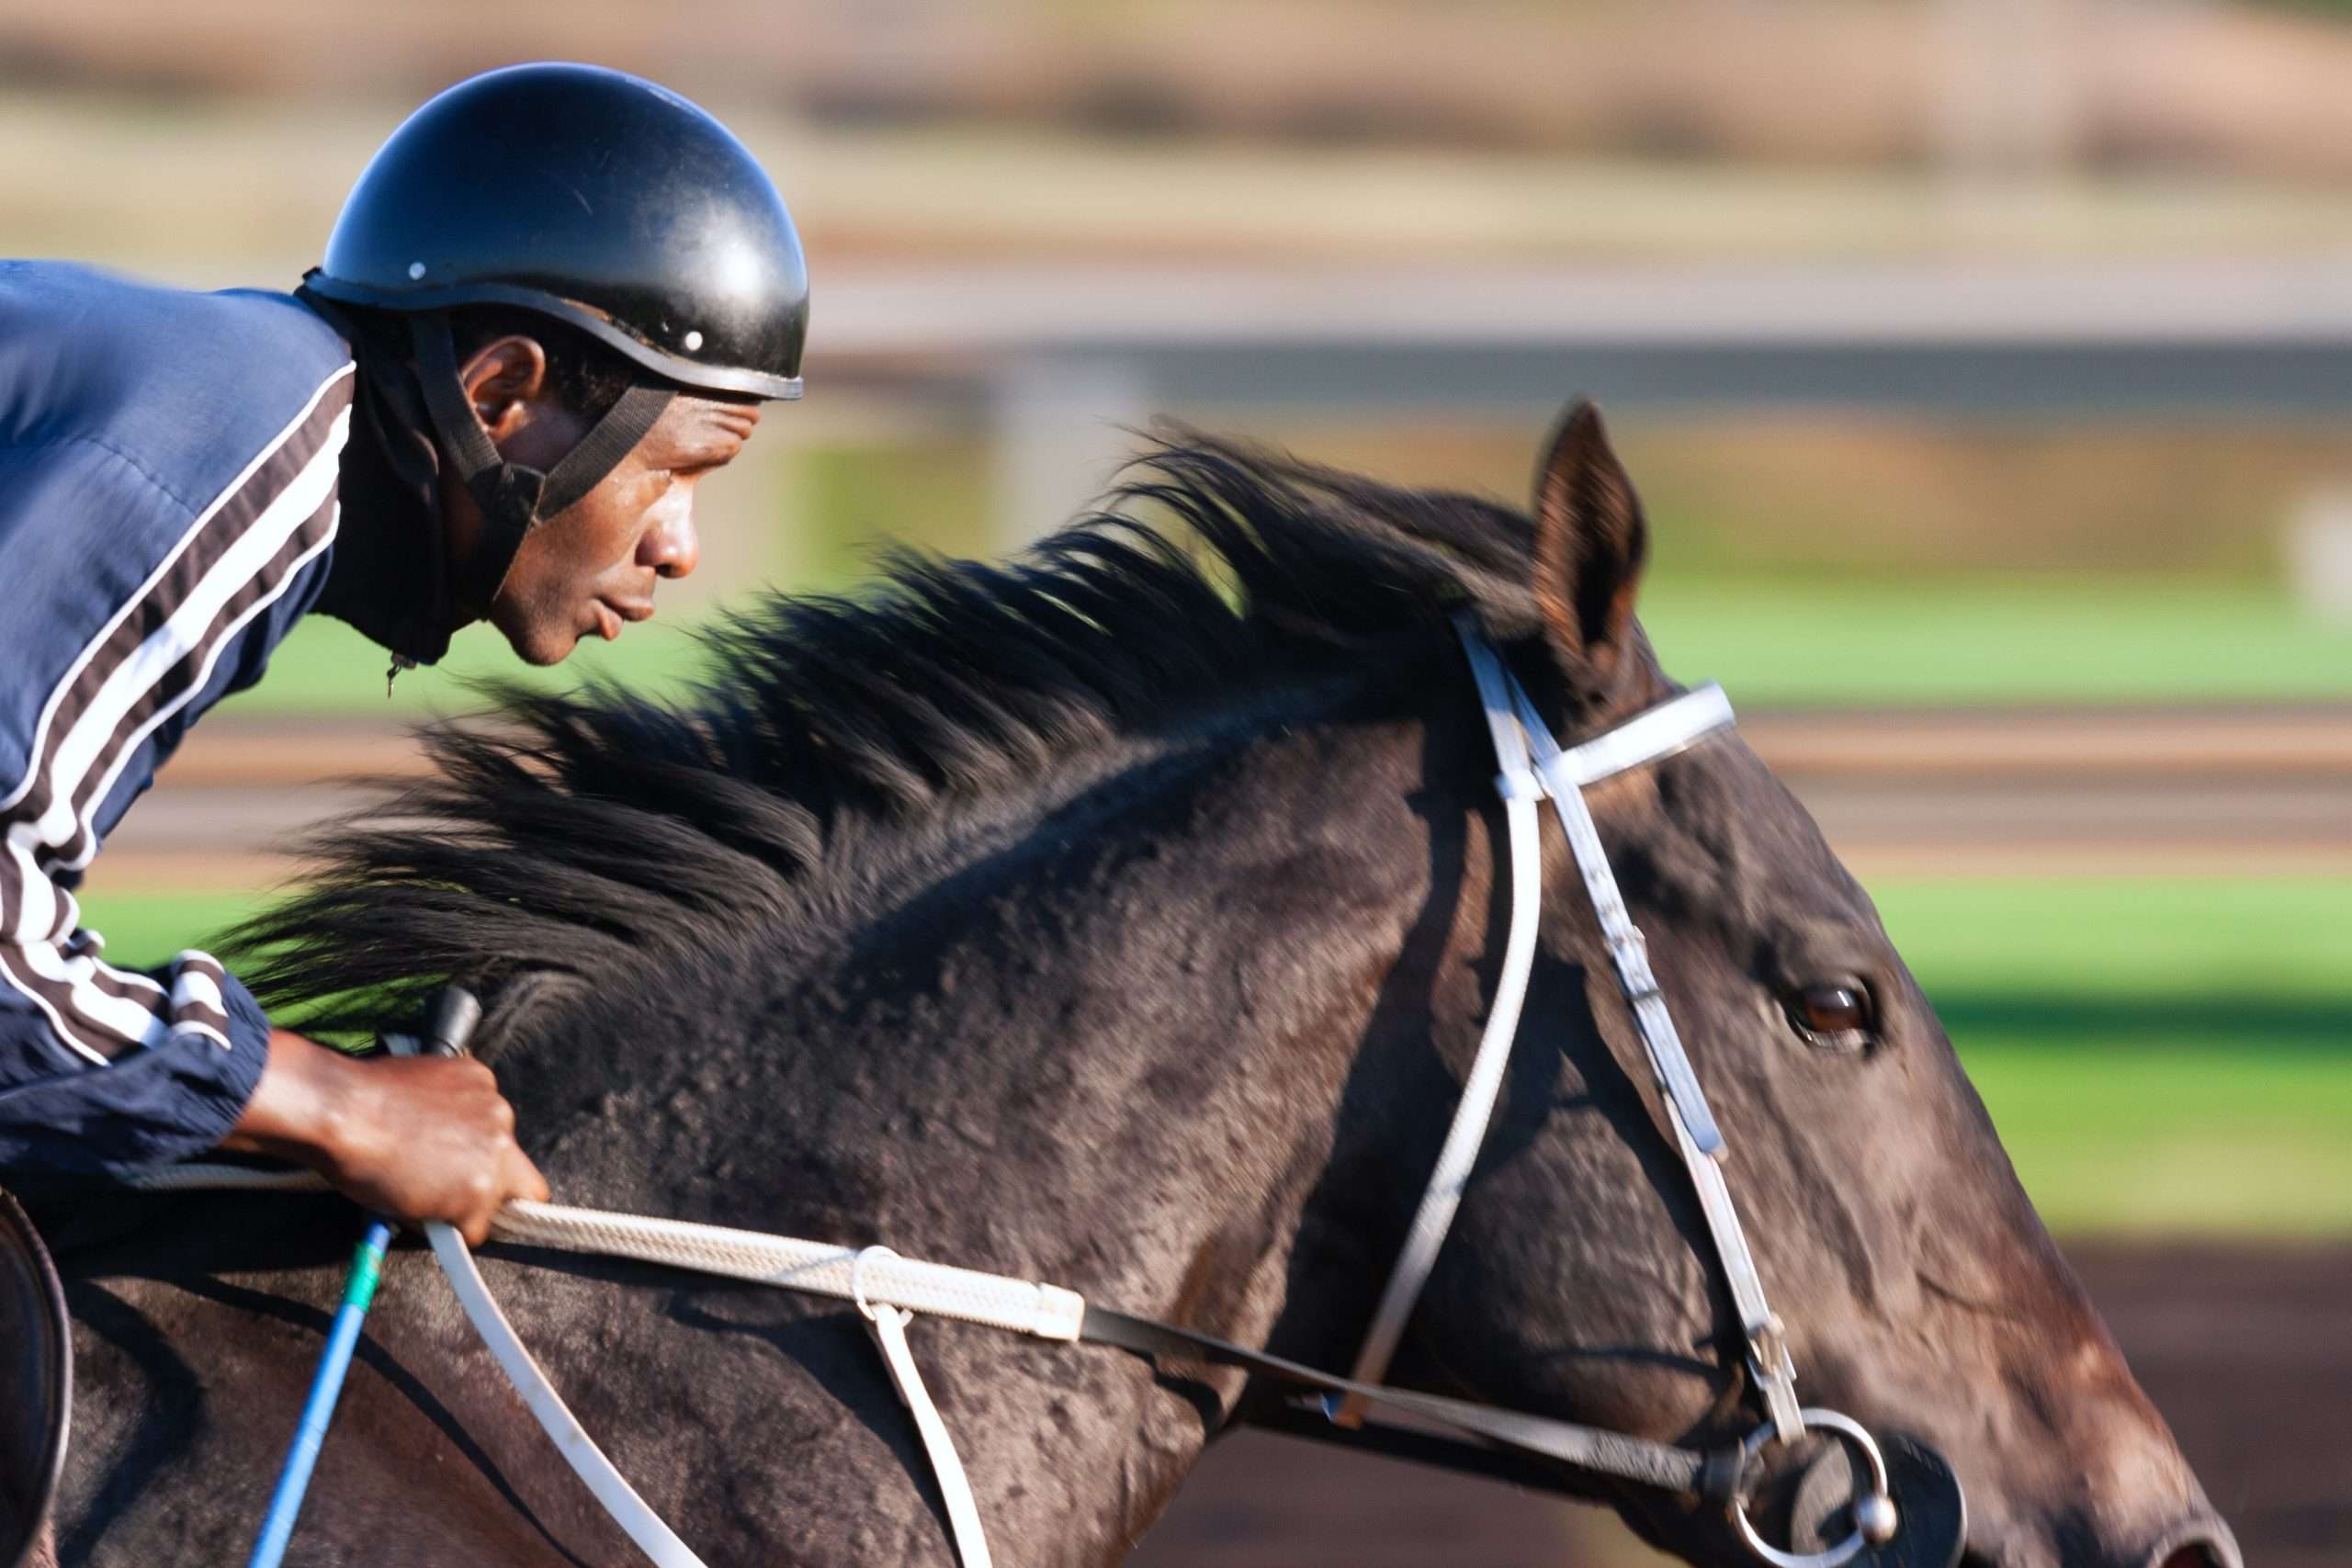 horse racing with jockey, what can we expect from the future of horse racing